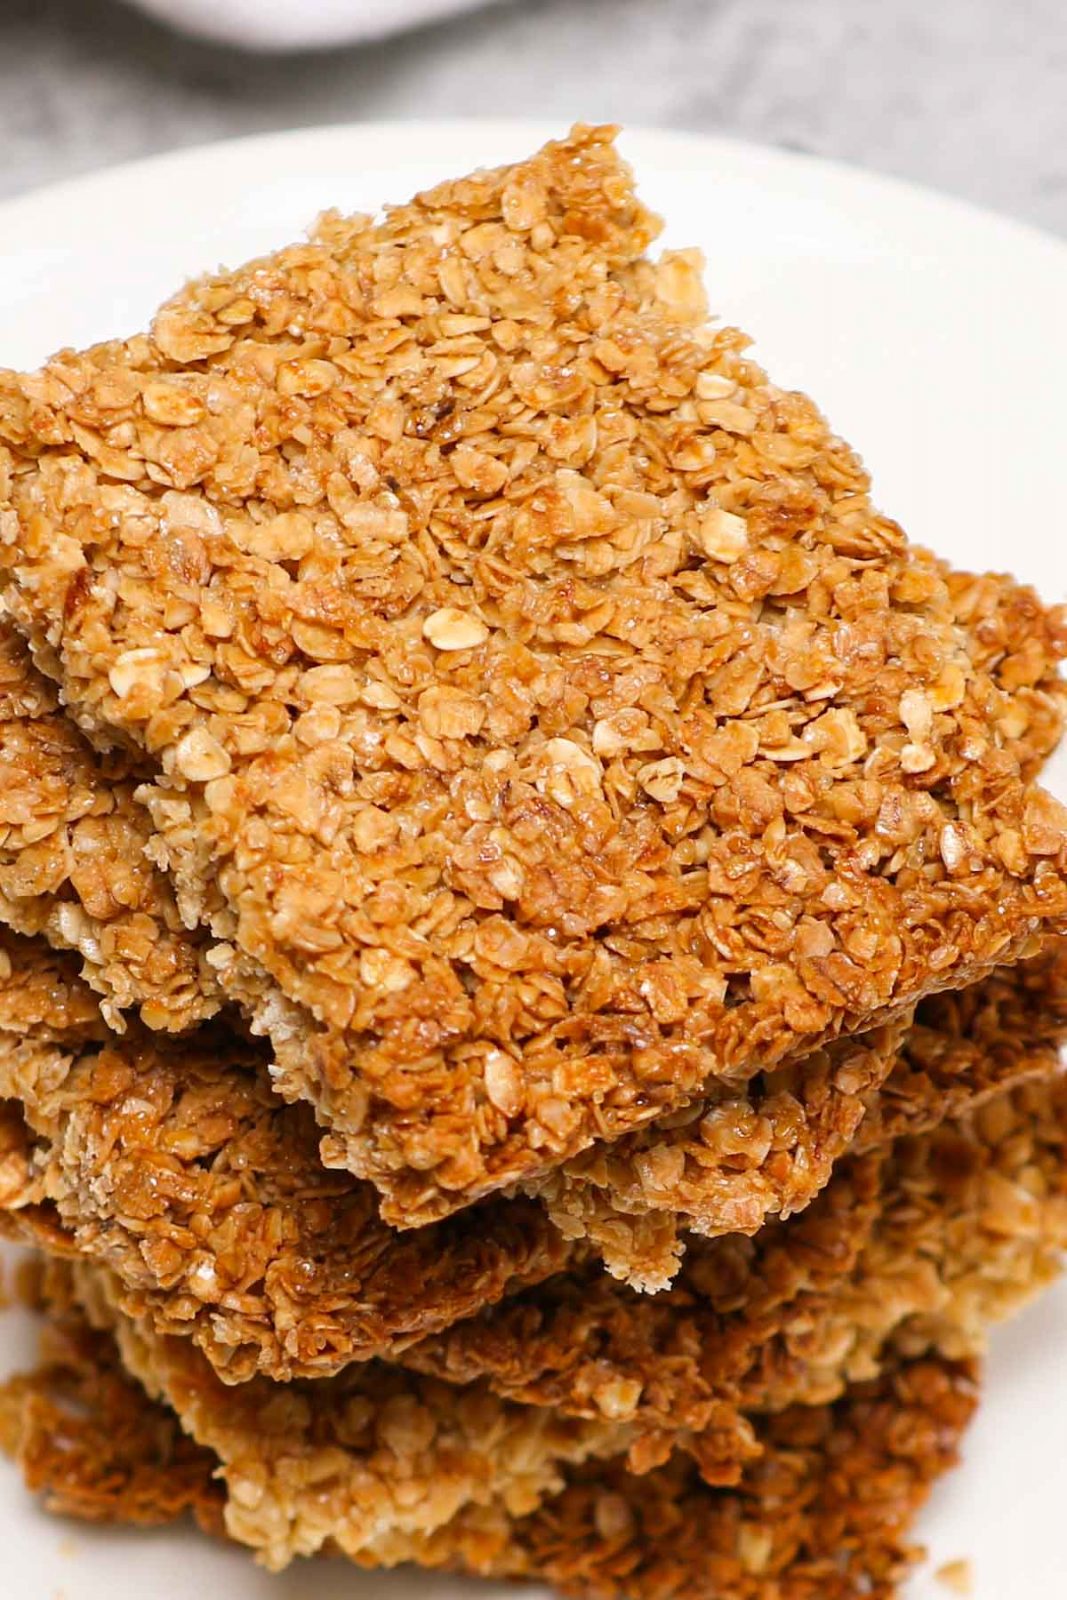 Hop across the pond for a taste of one of the UK’s yummiest treats. Traditional British Flap Jacks are delicious bars of oats and golden syrup, baked until they’re lightly brown. It’s similar to granola bars and are made with simple, wholesome ingredients you probably already have on hand.